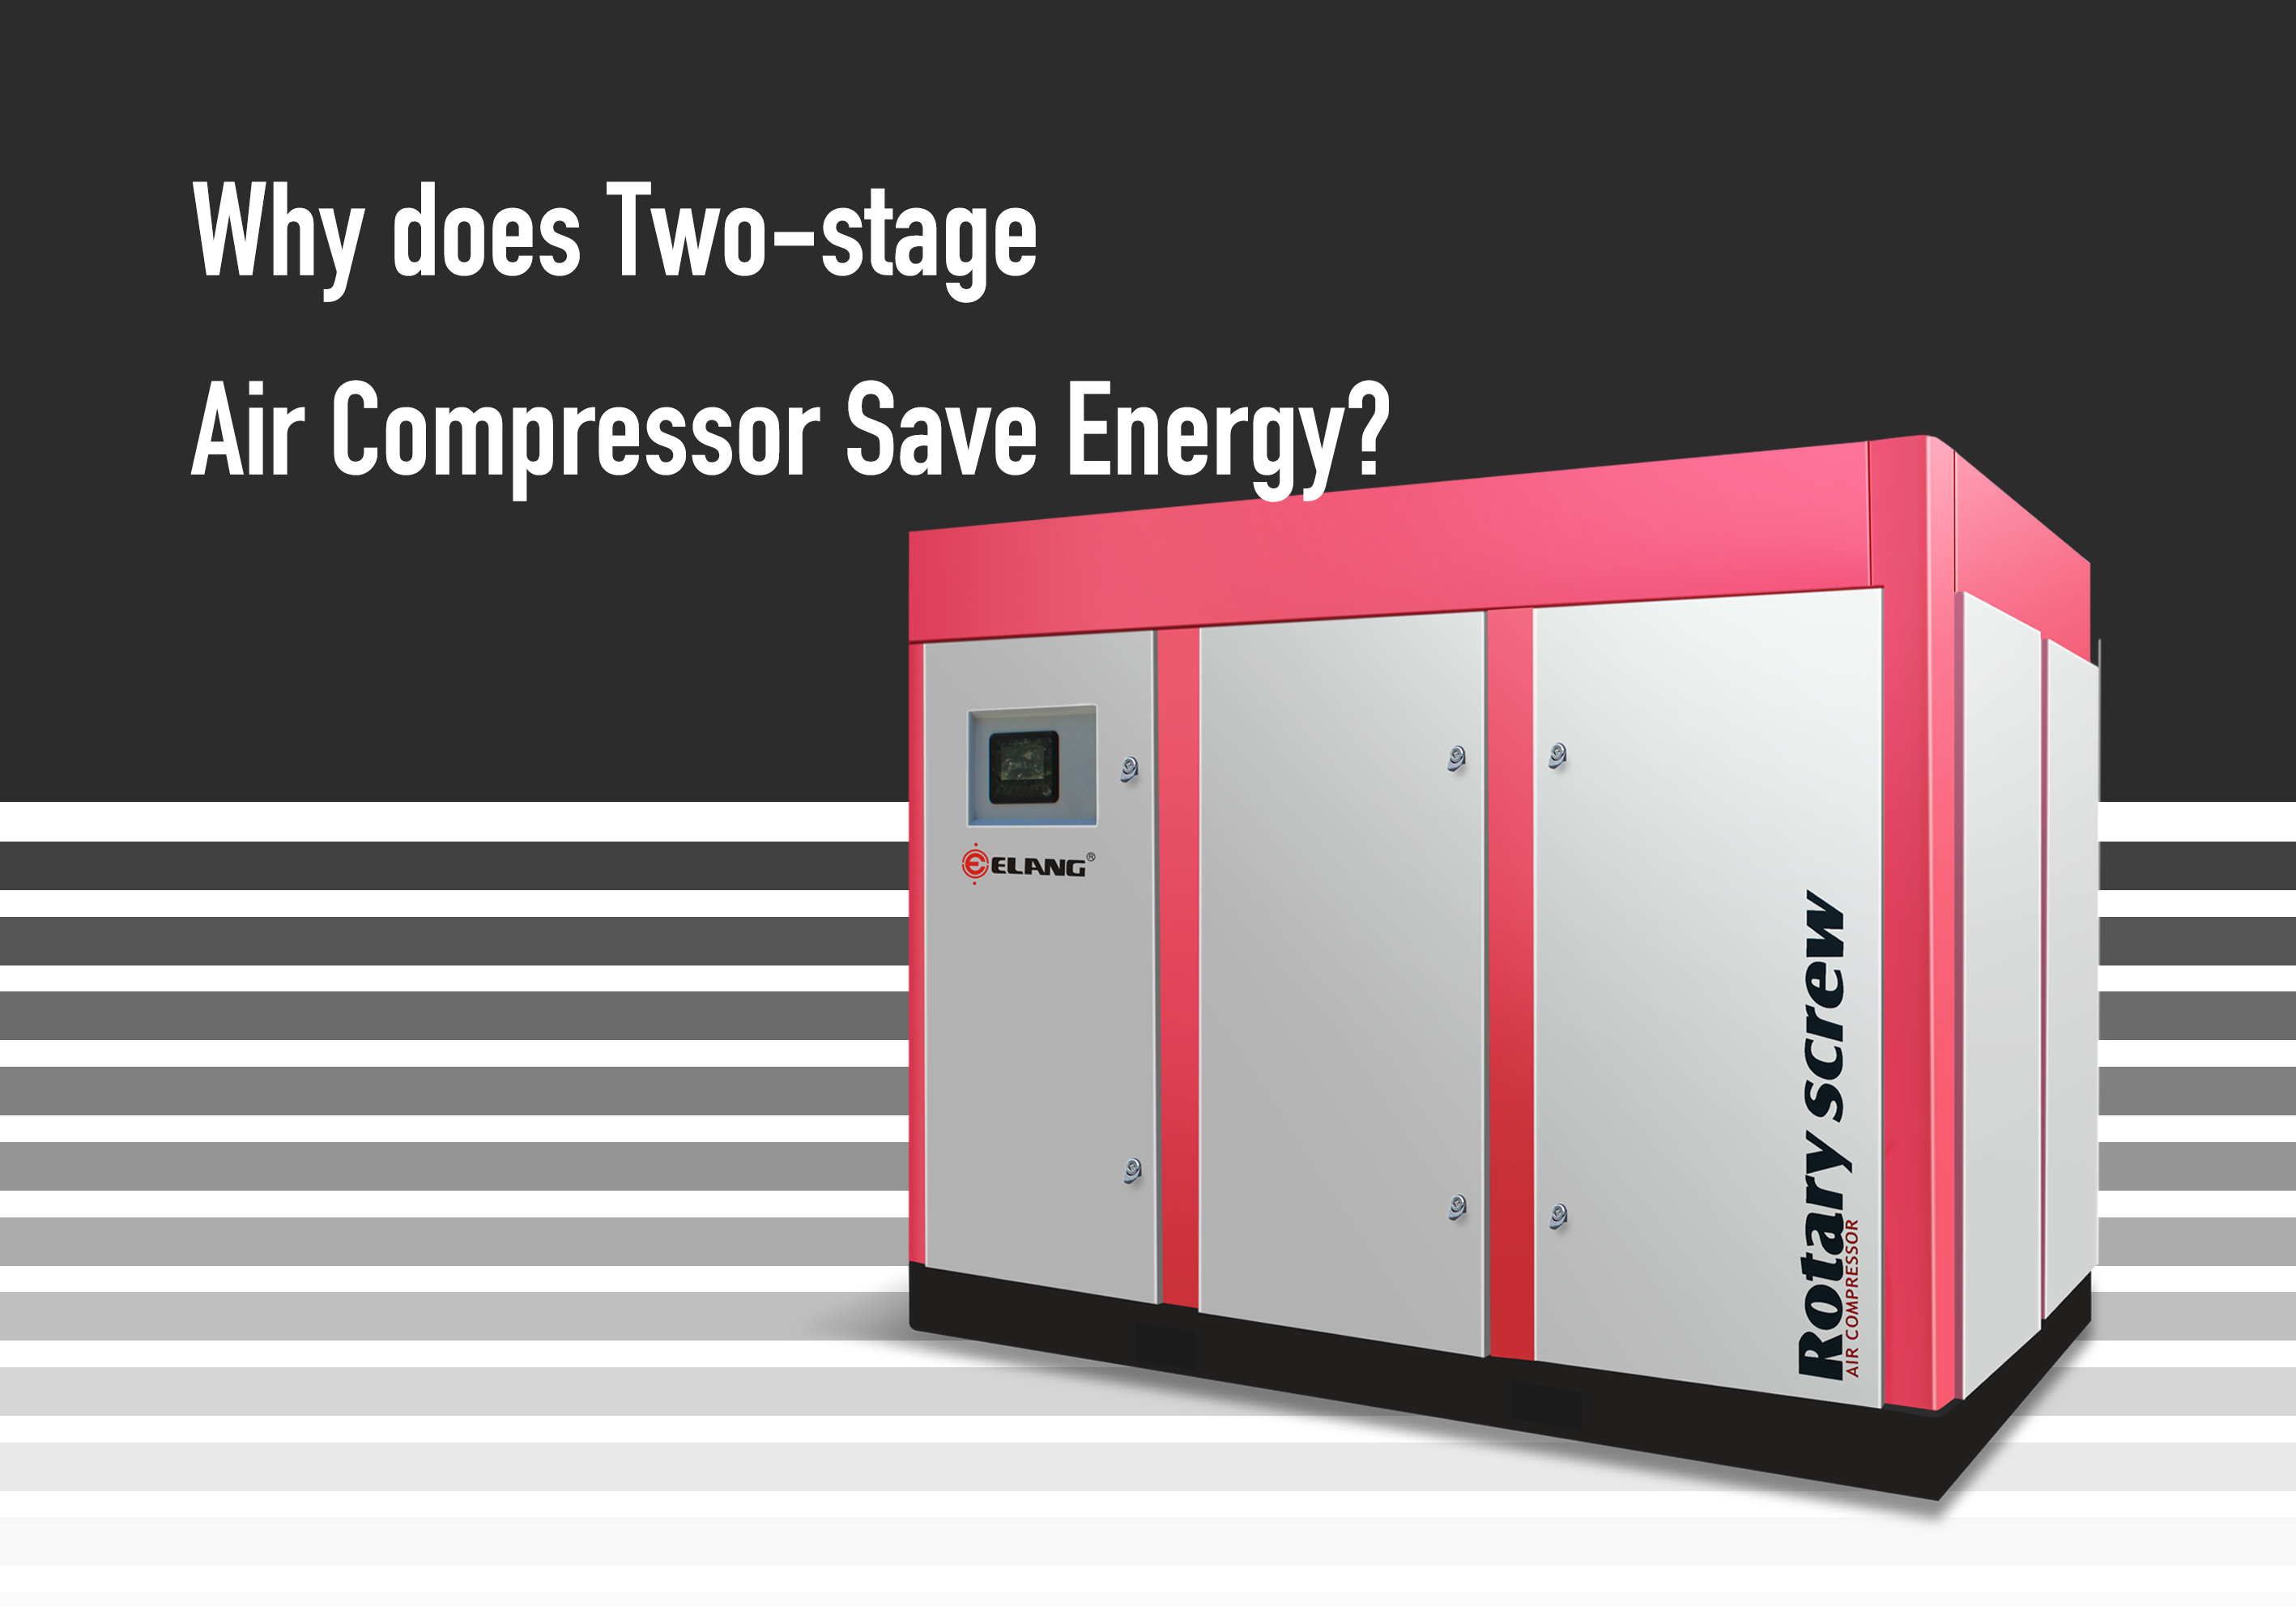 Why does Two-stage Air Compressor Save Energy